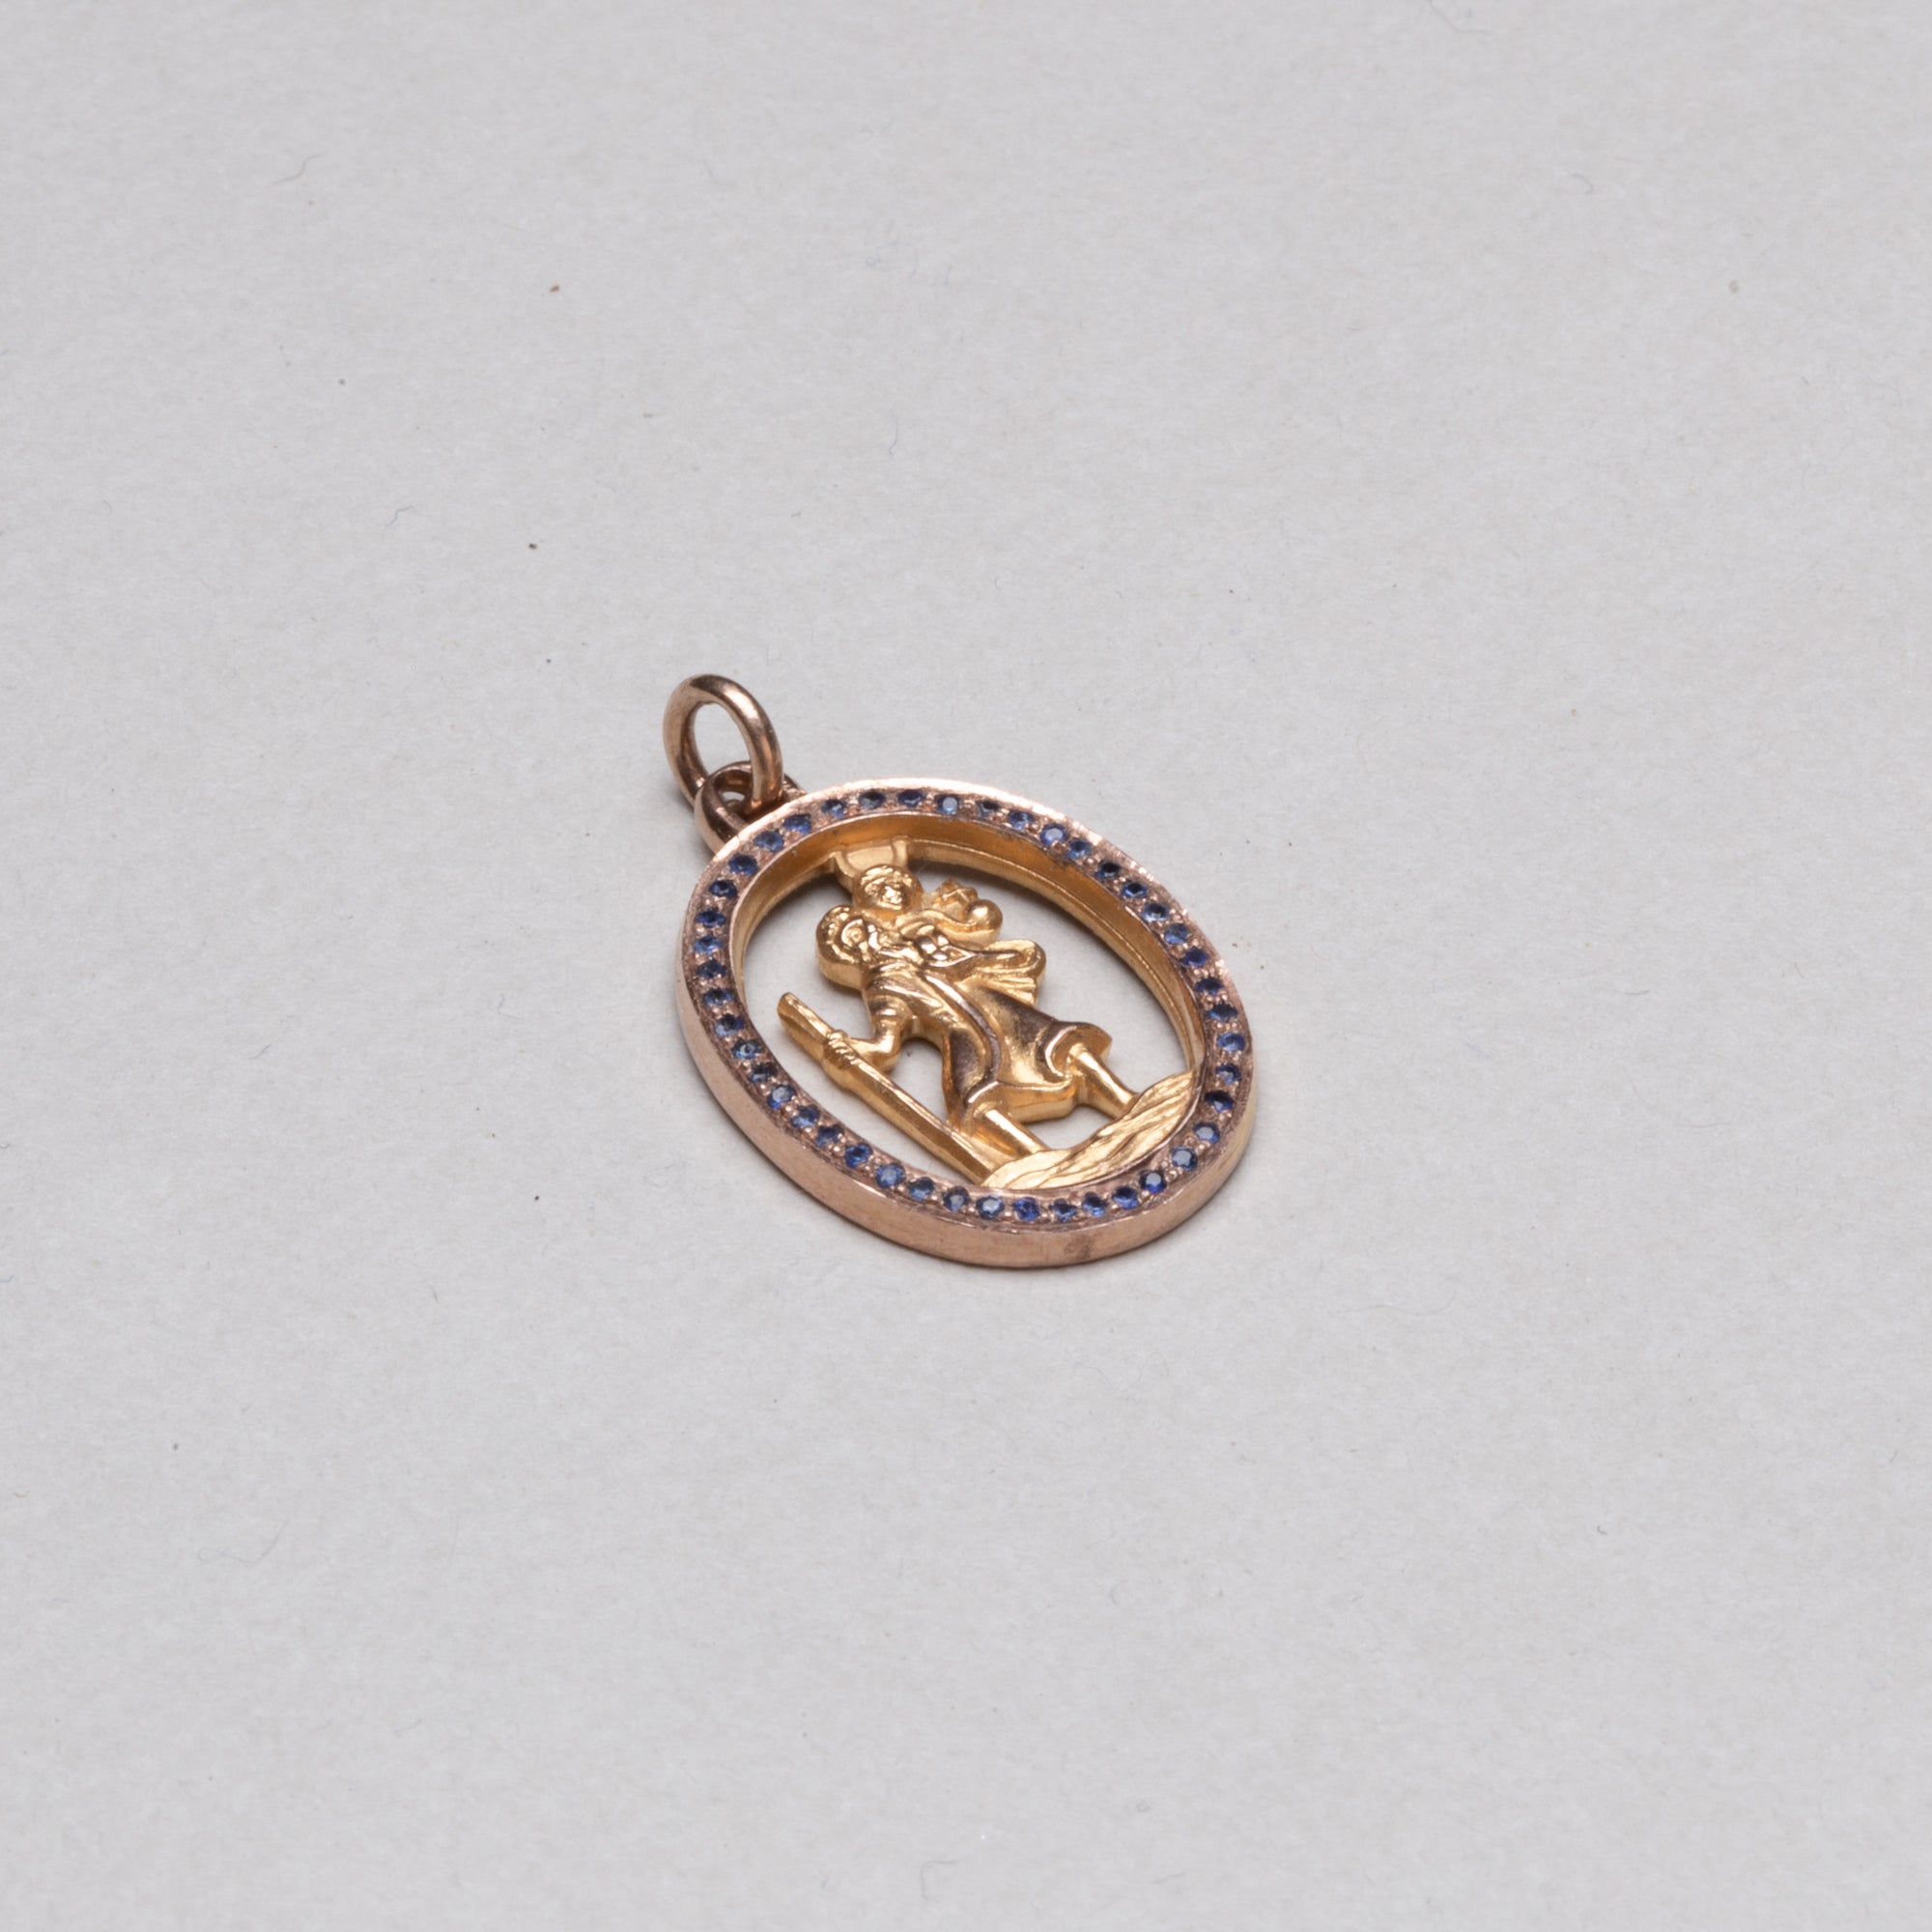 Vintage Oval 9ct Gold St. Christopher Charm Pendant with Sapphires